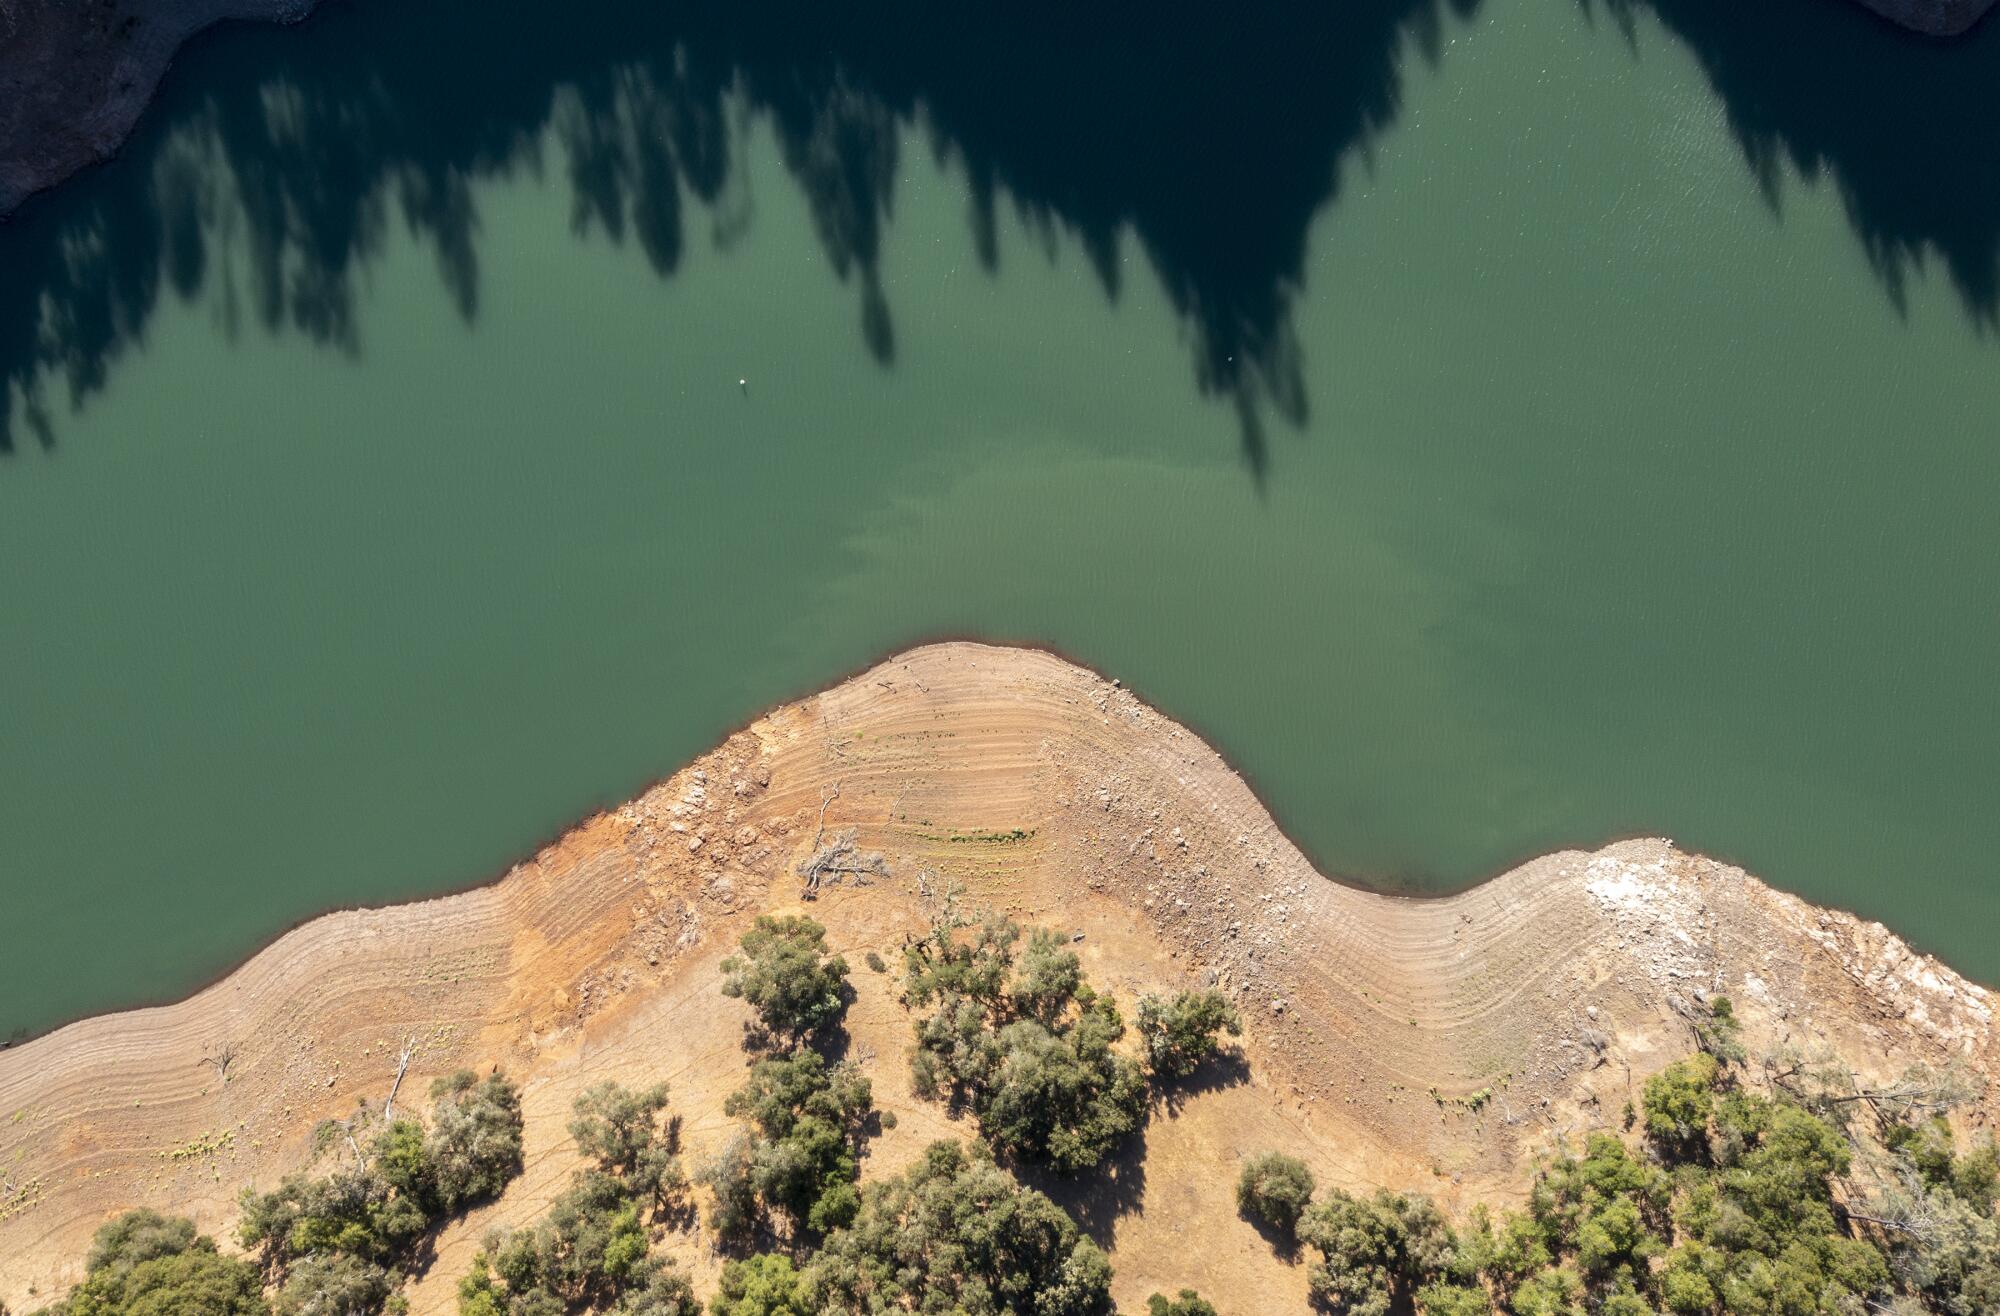 Land once underwater is exposed by receding water levels on Lake Sonoma in Geyserville, Calif.